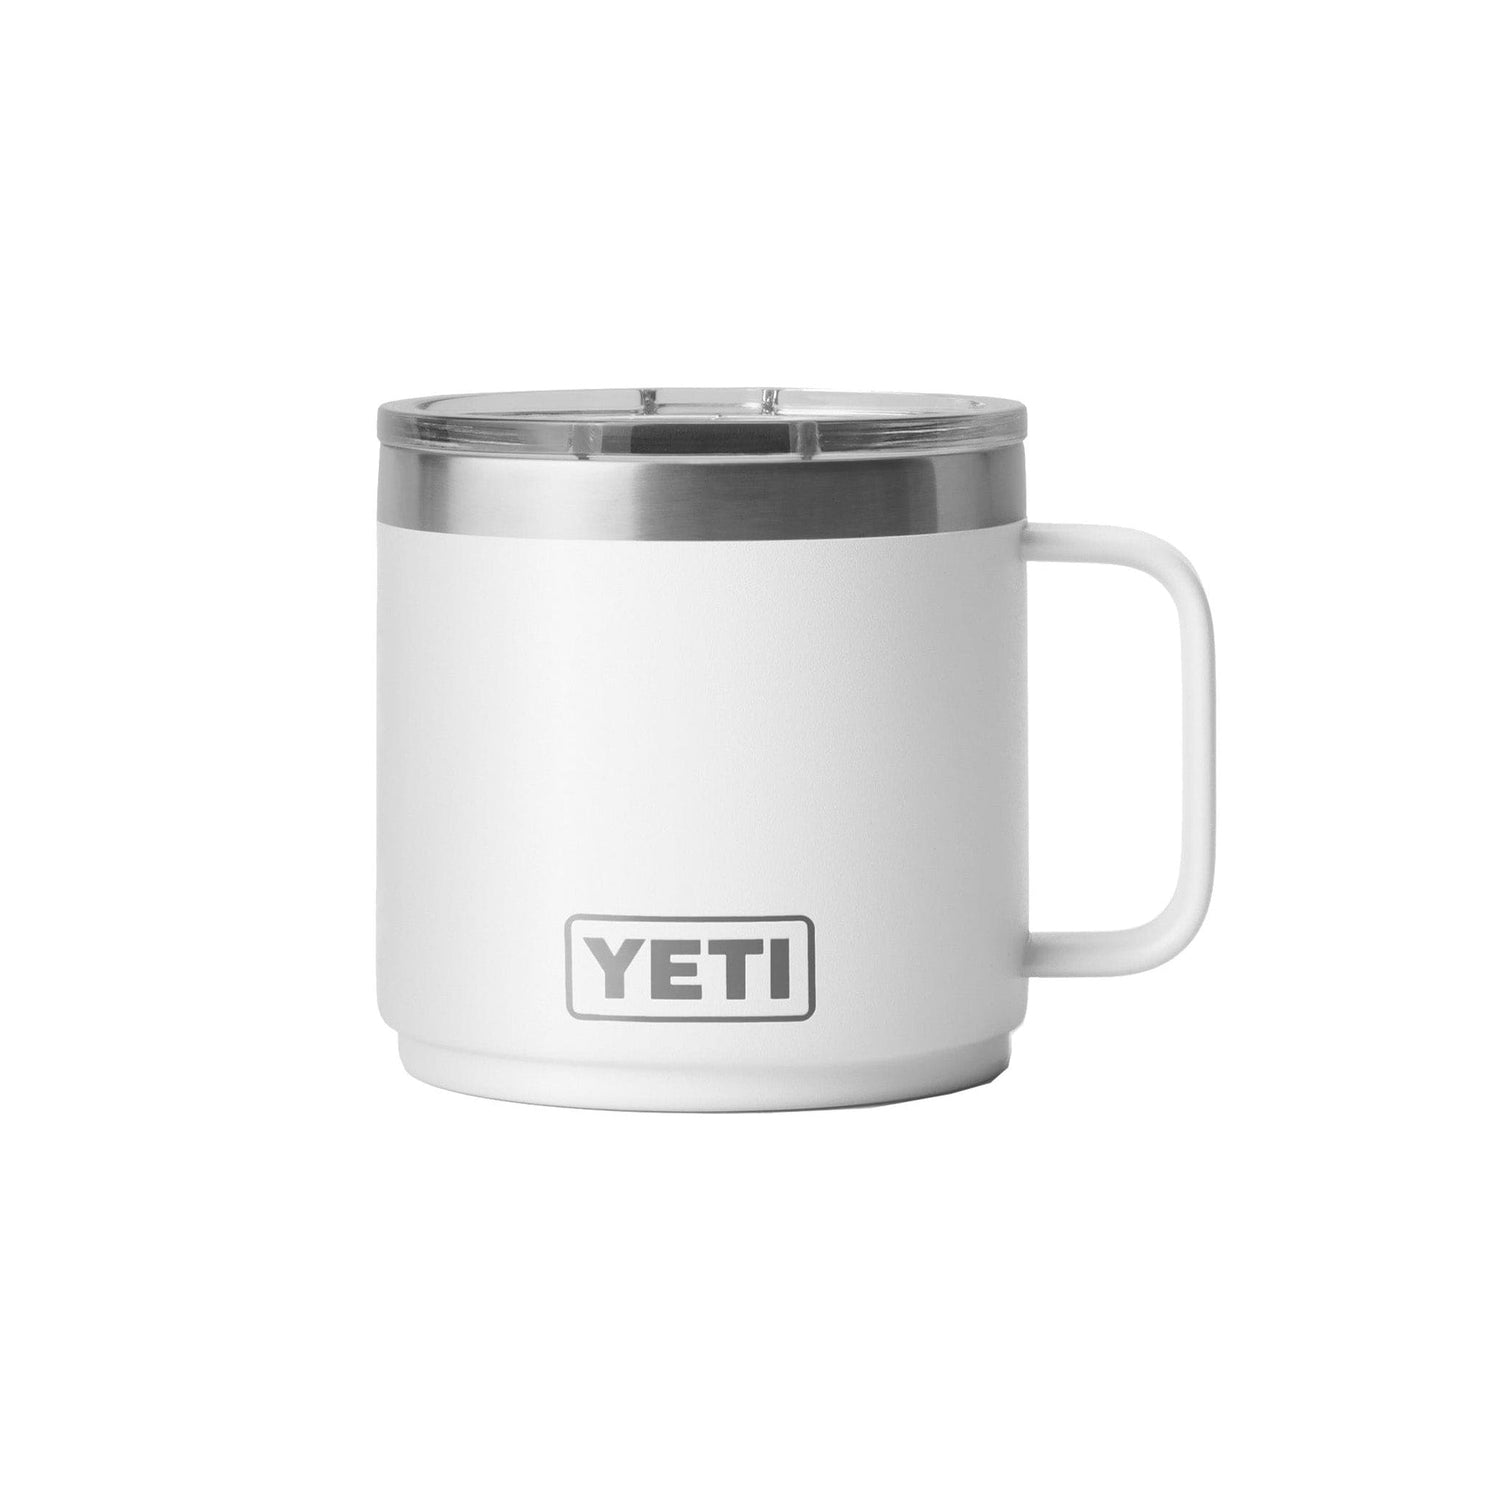 This popular Yeti travel mug makes a great gift — and it's on sale